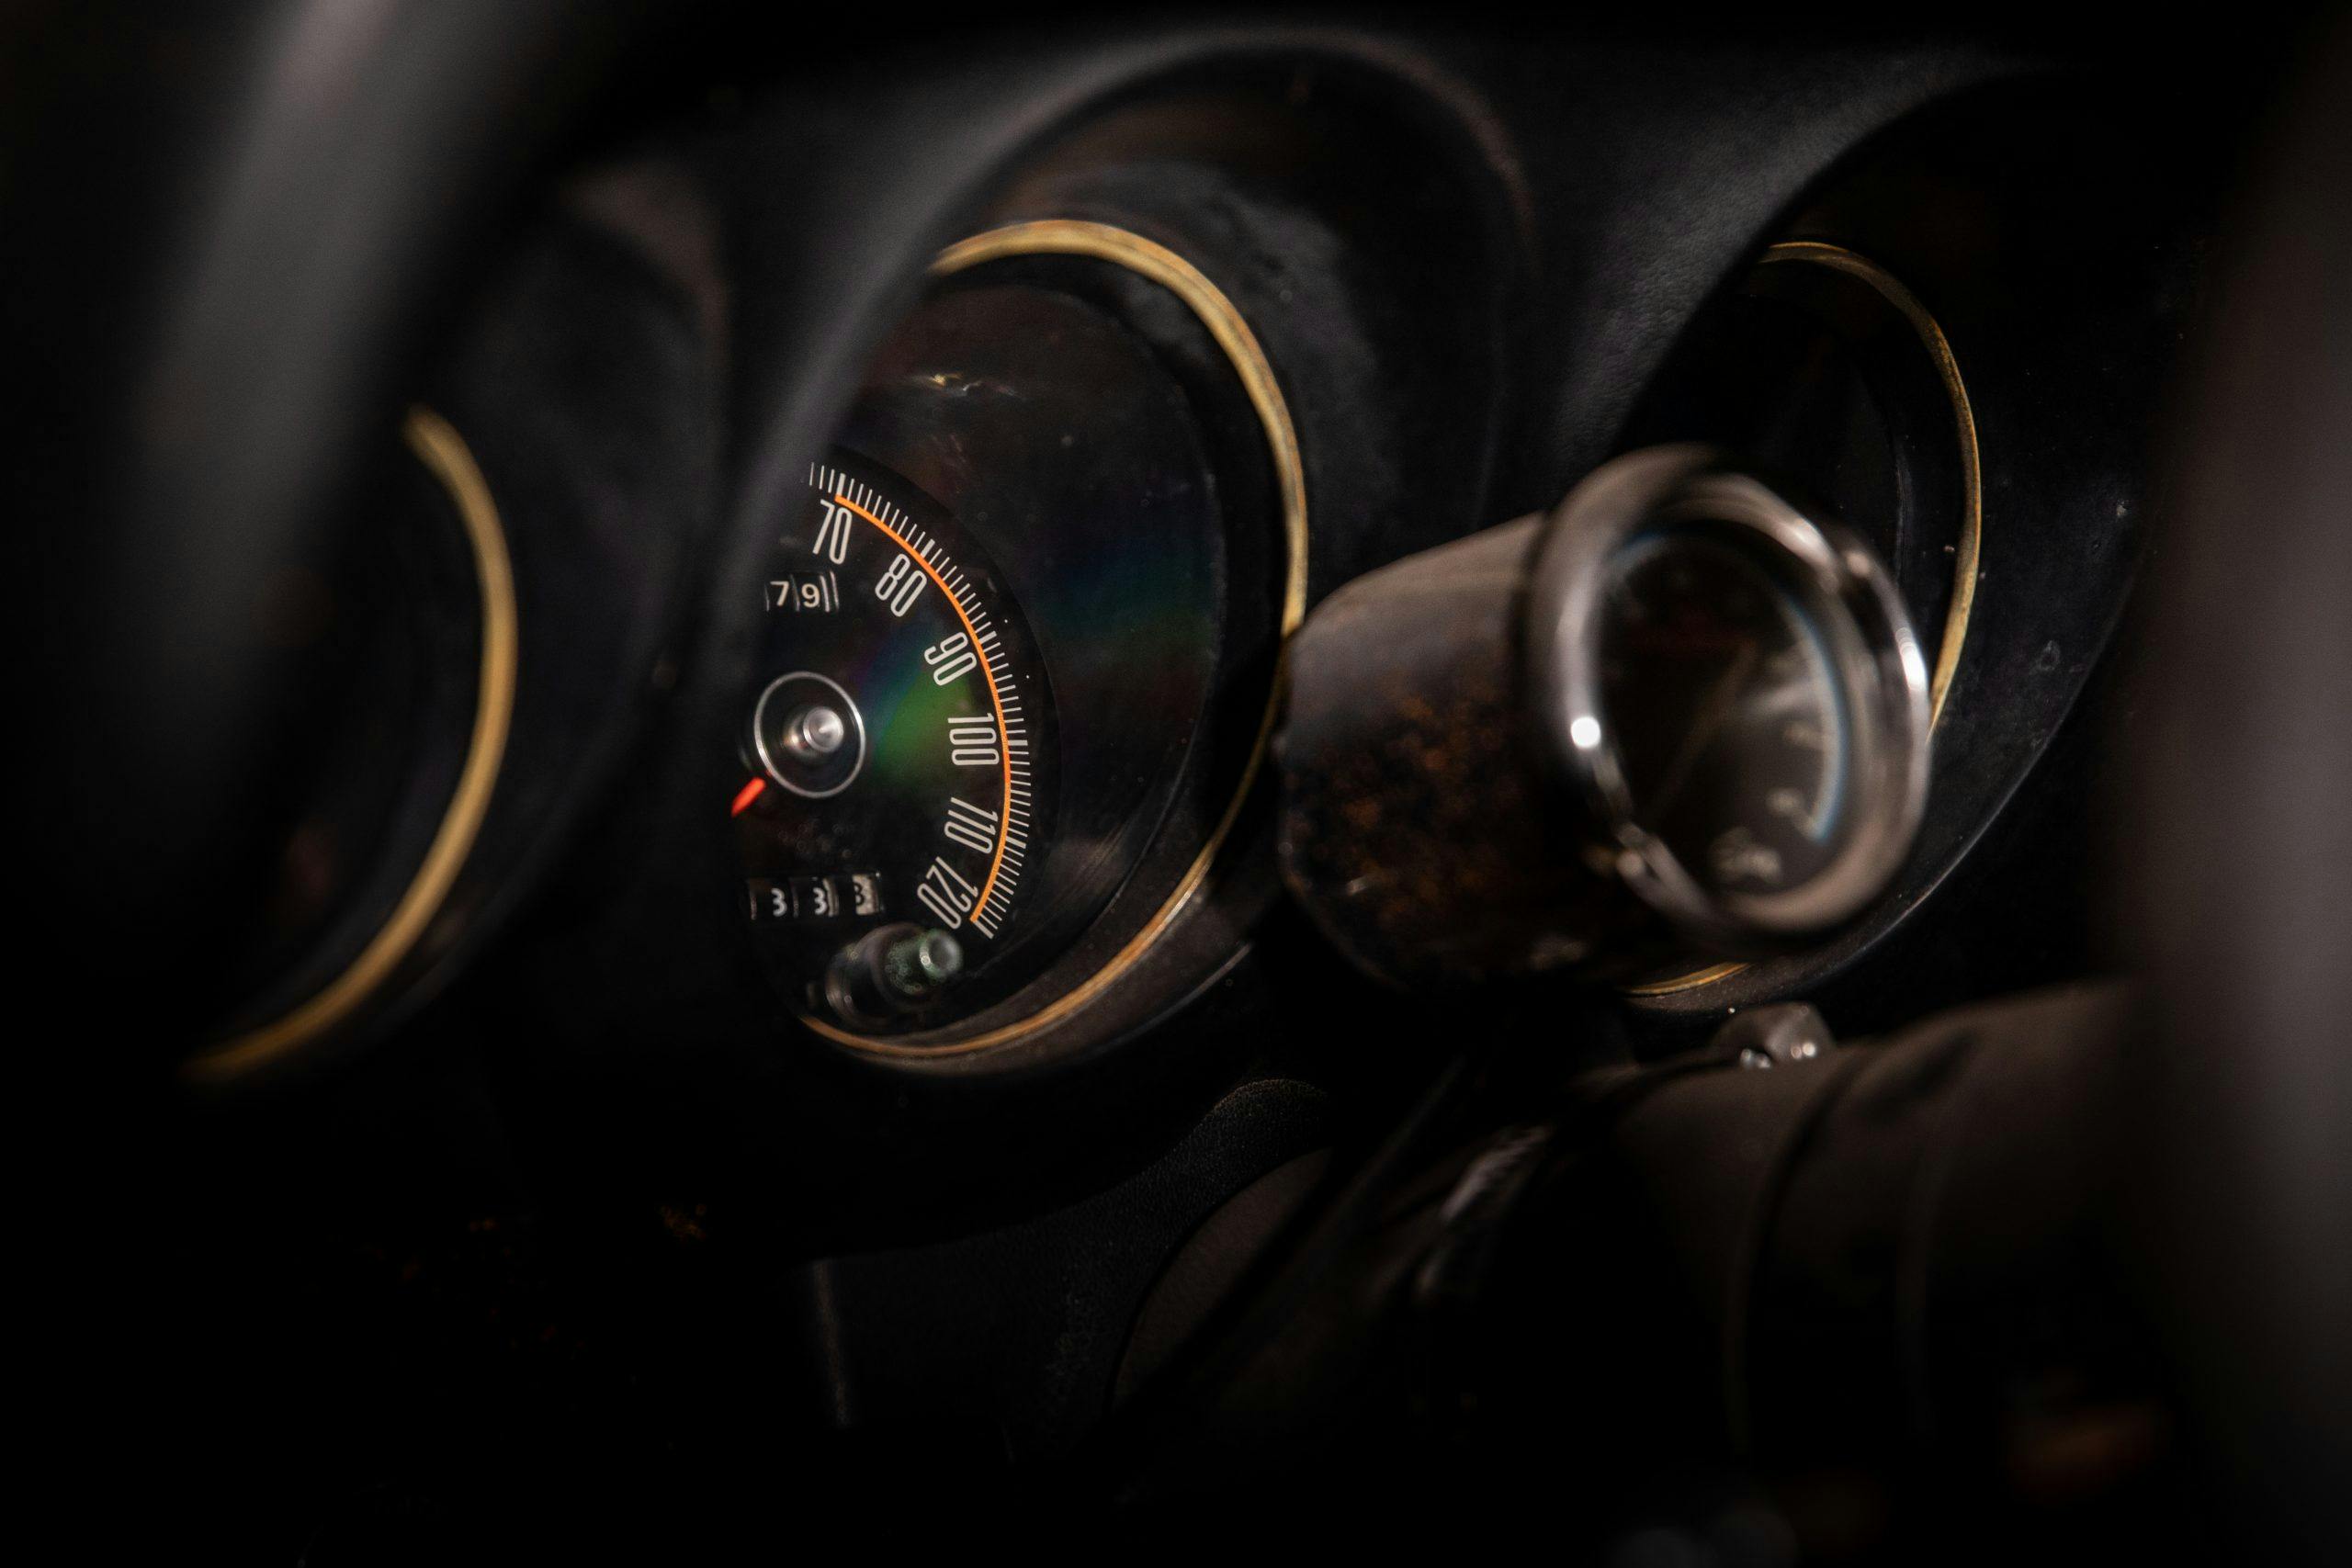 Boss Mustang connection speedometer